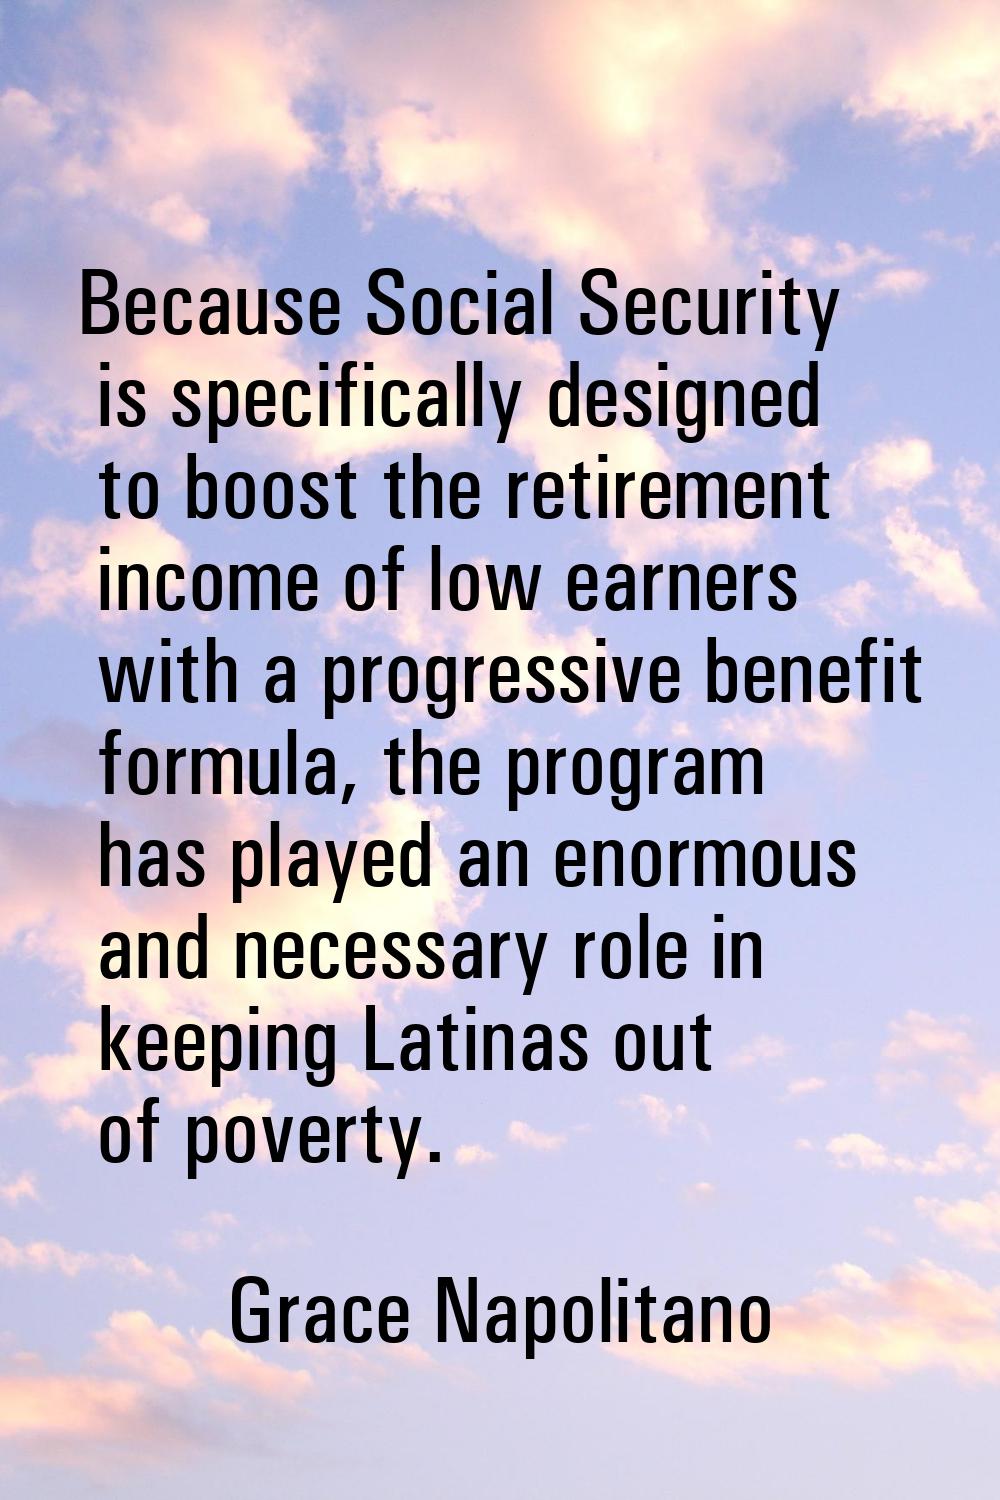 Because Social Security is specifically designed to boost the retirement income of low earners with